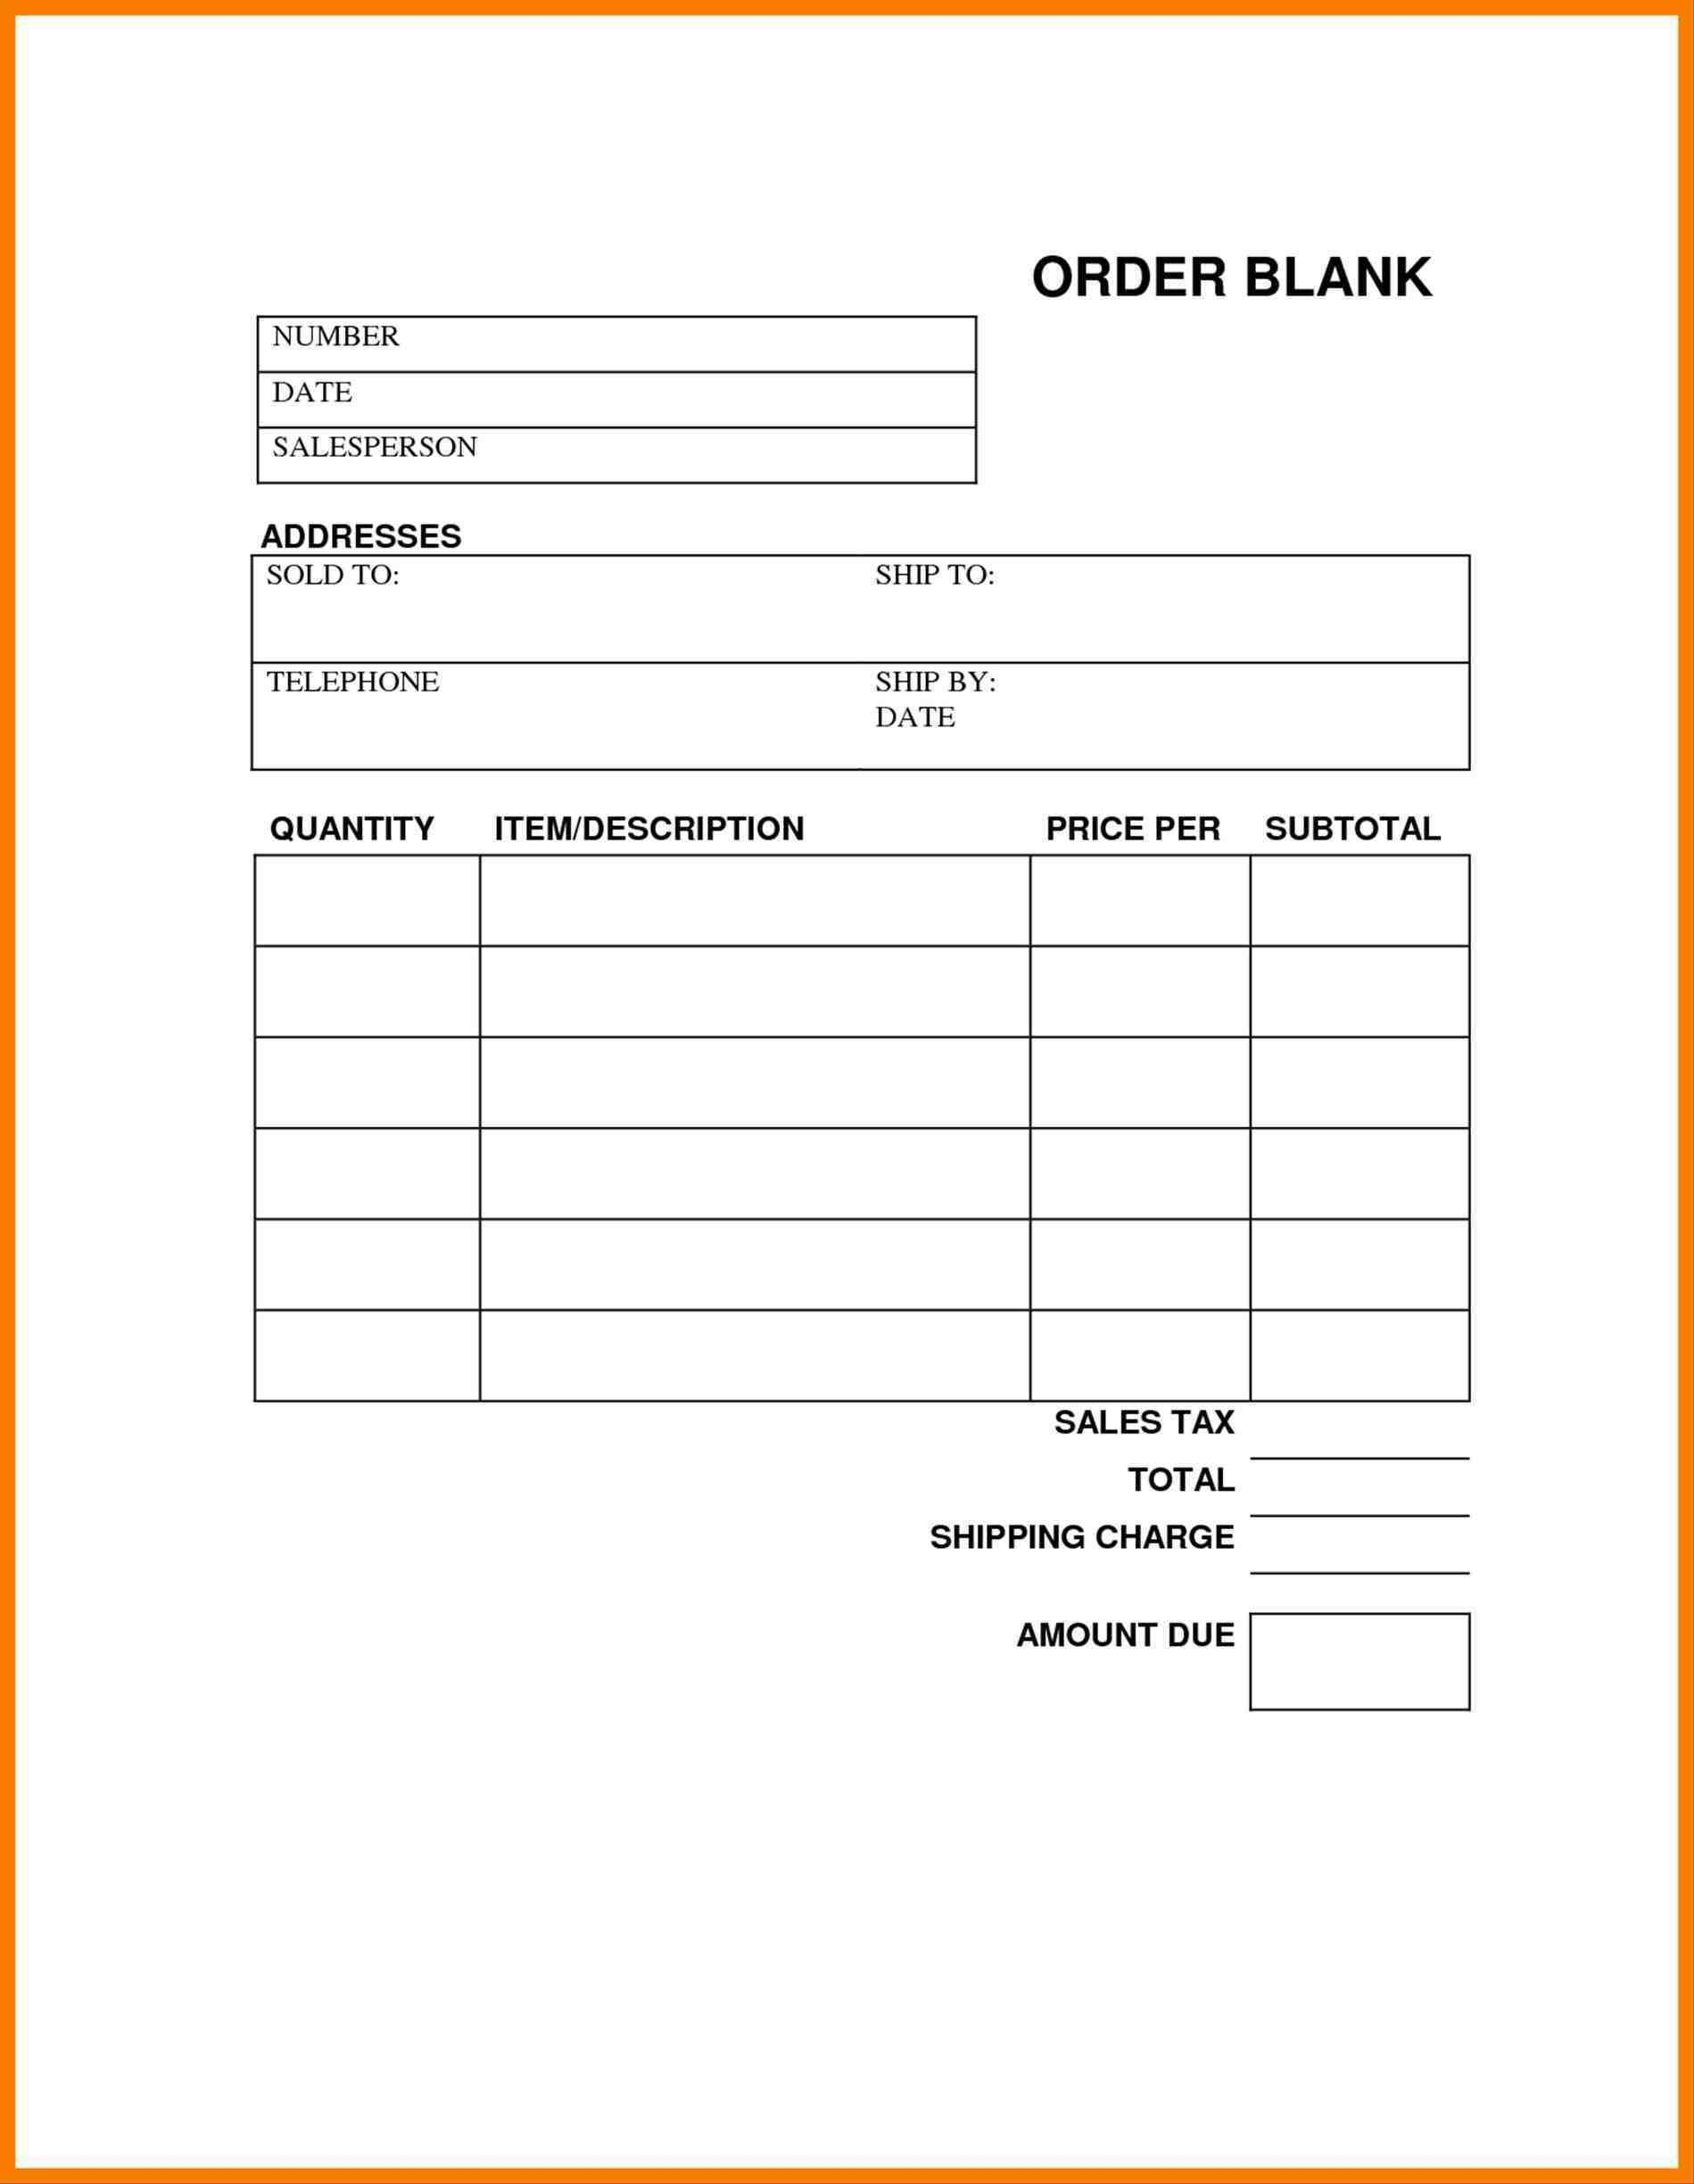 Blank Order Forms Templates Free | Free Tamplate | Pinterest | Order - Free Printable Order Forms